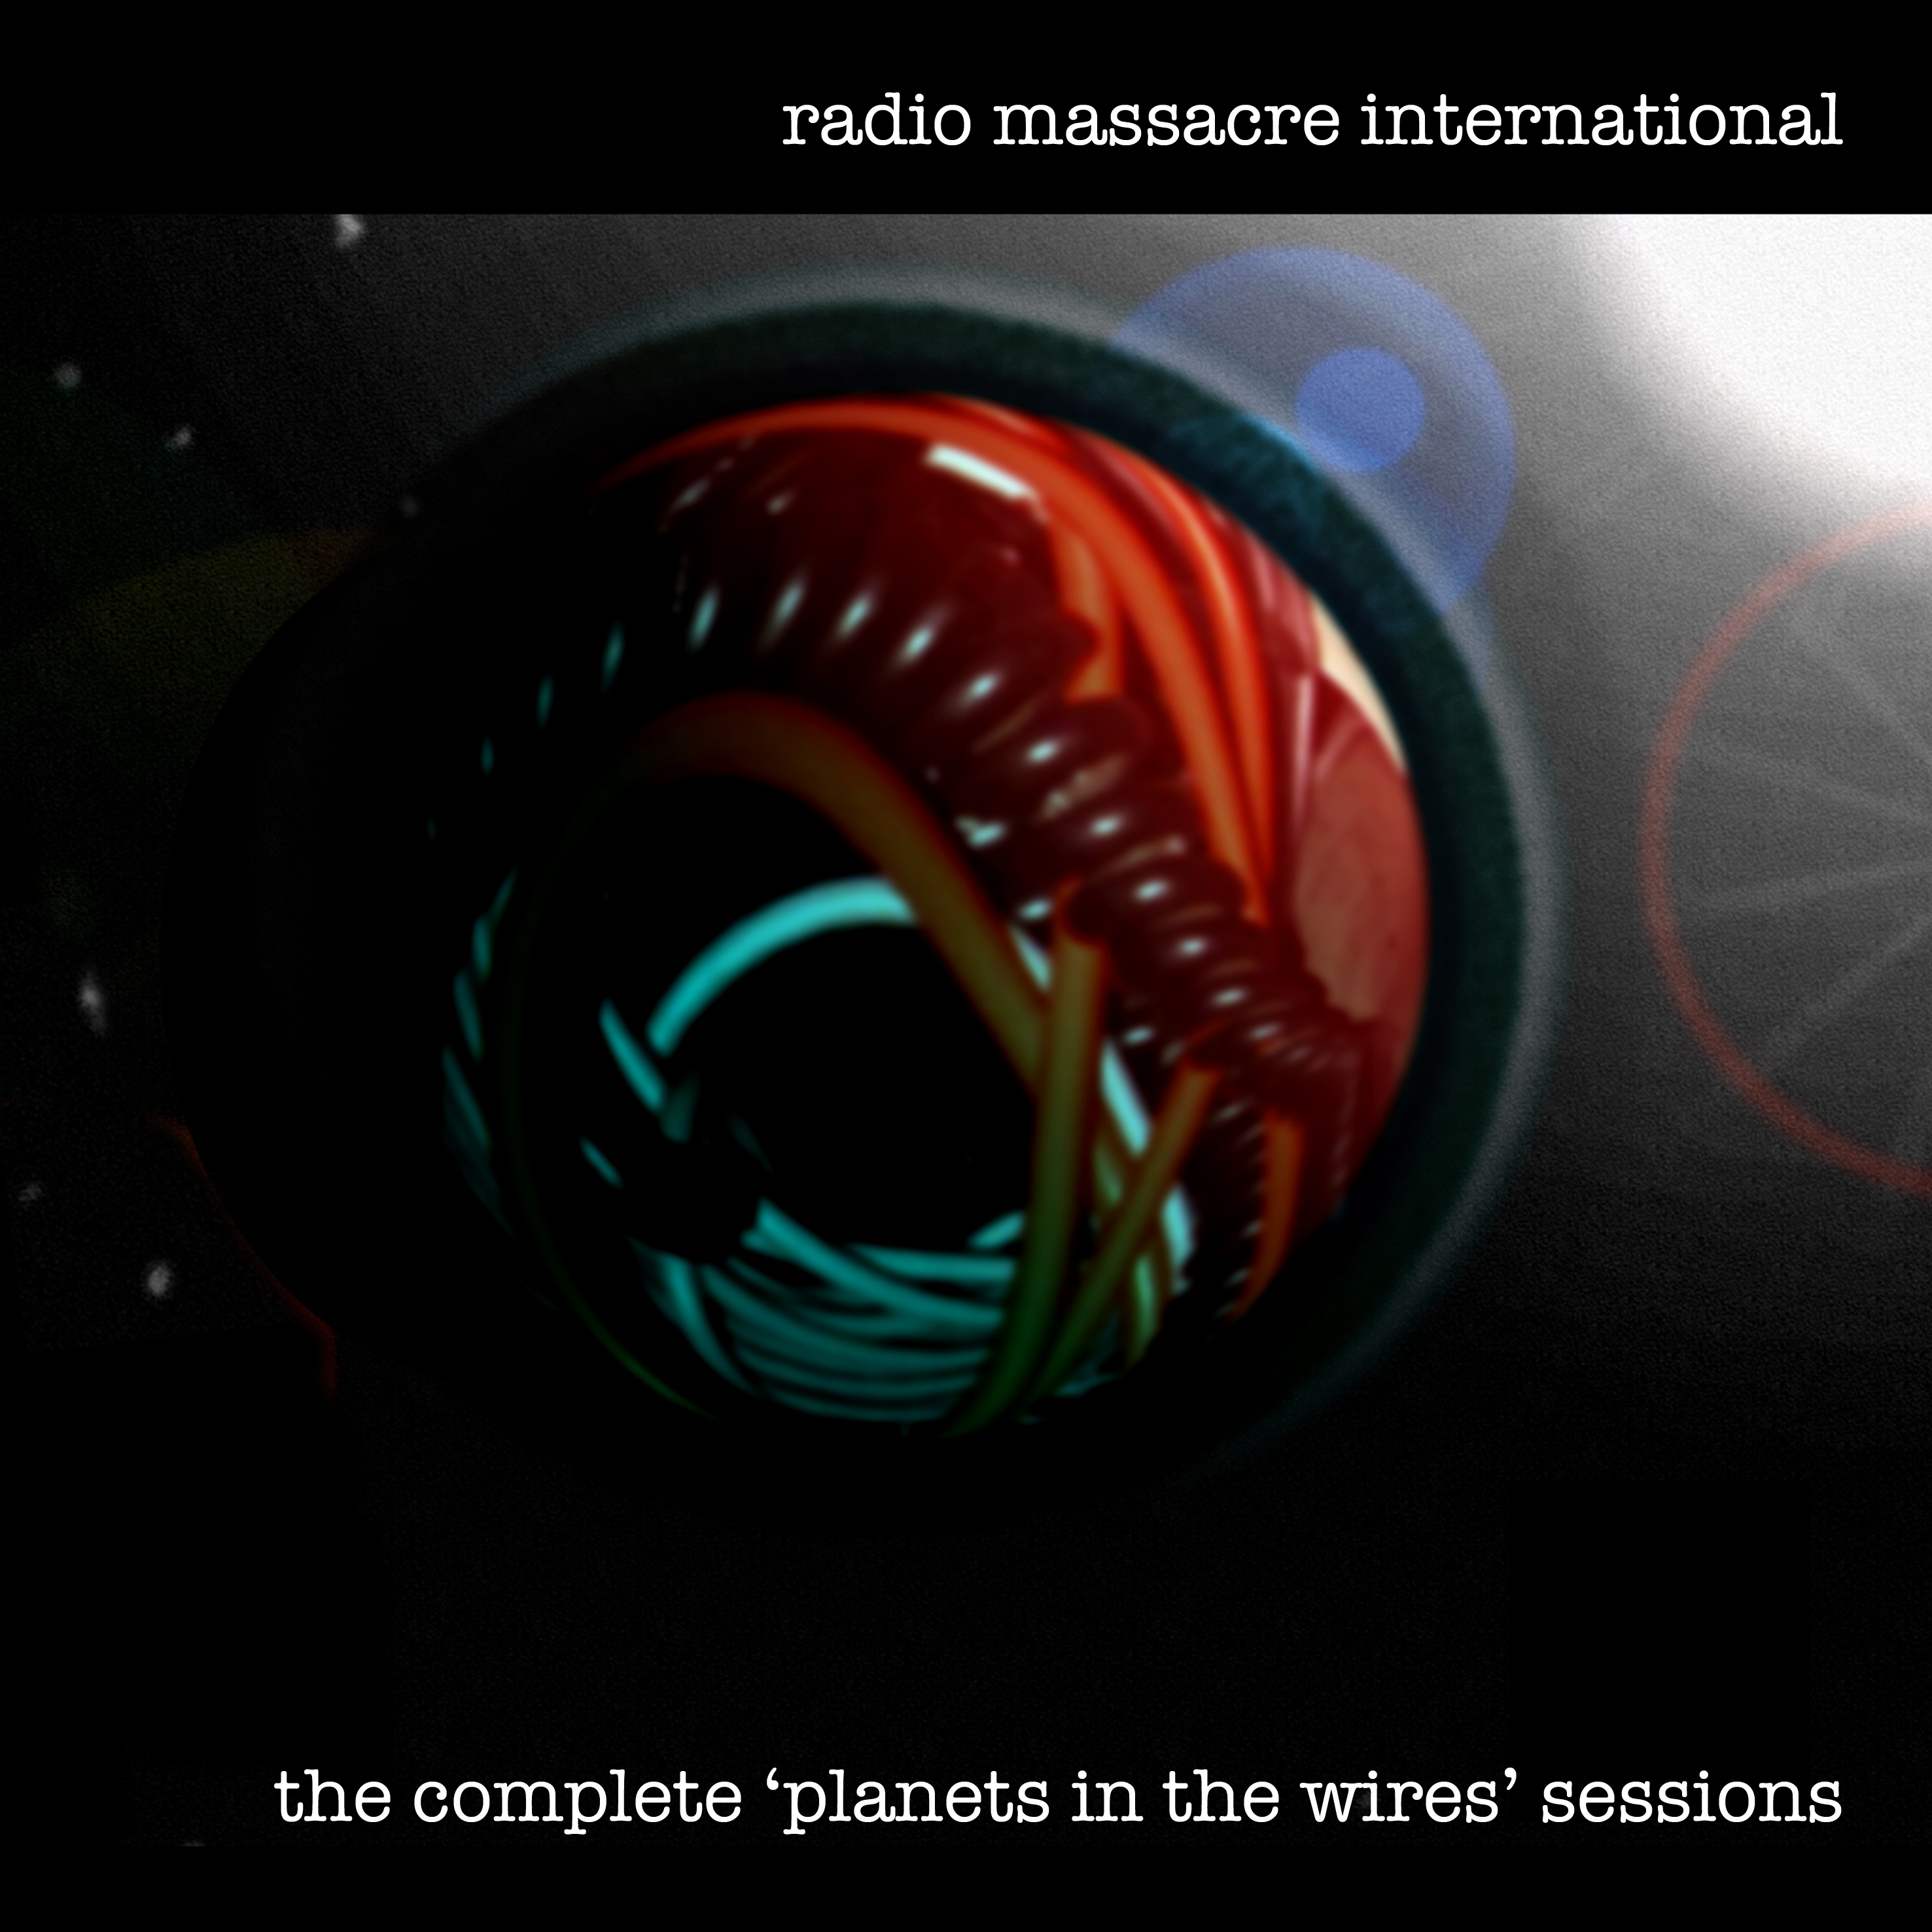 the complete planets in the wires sessions